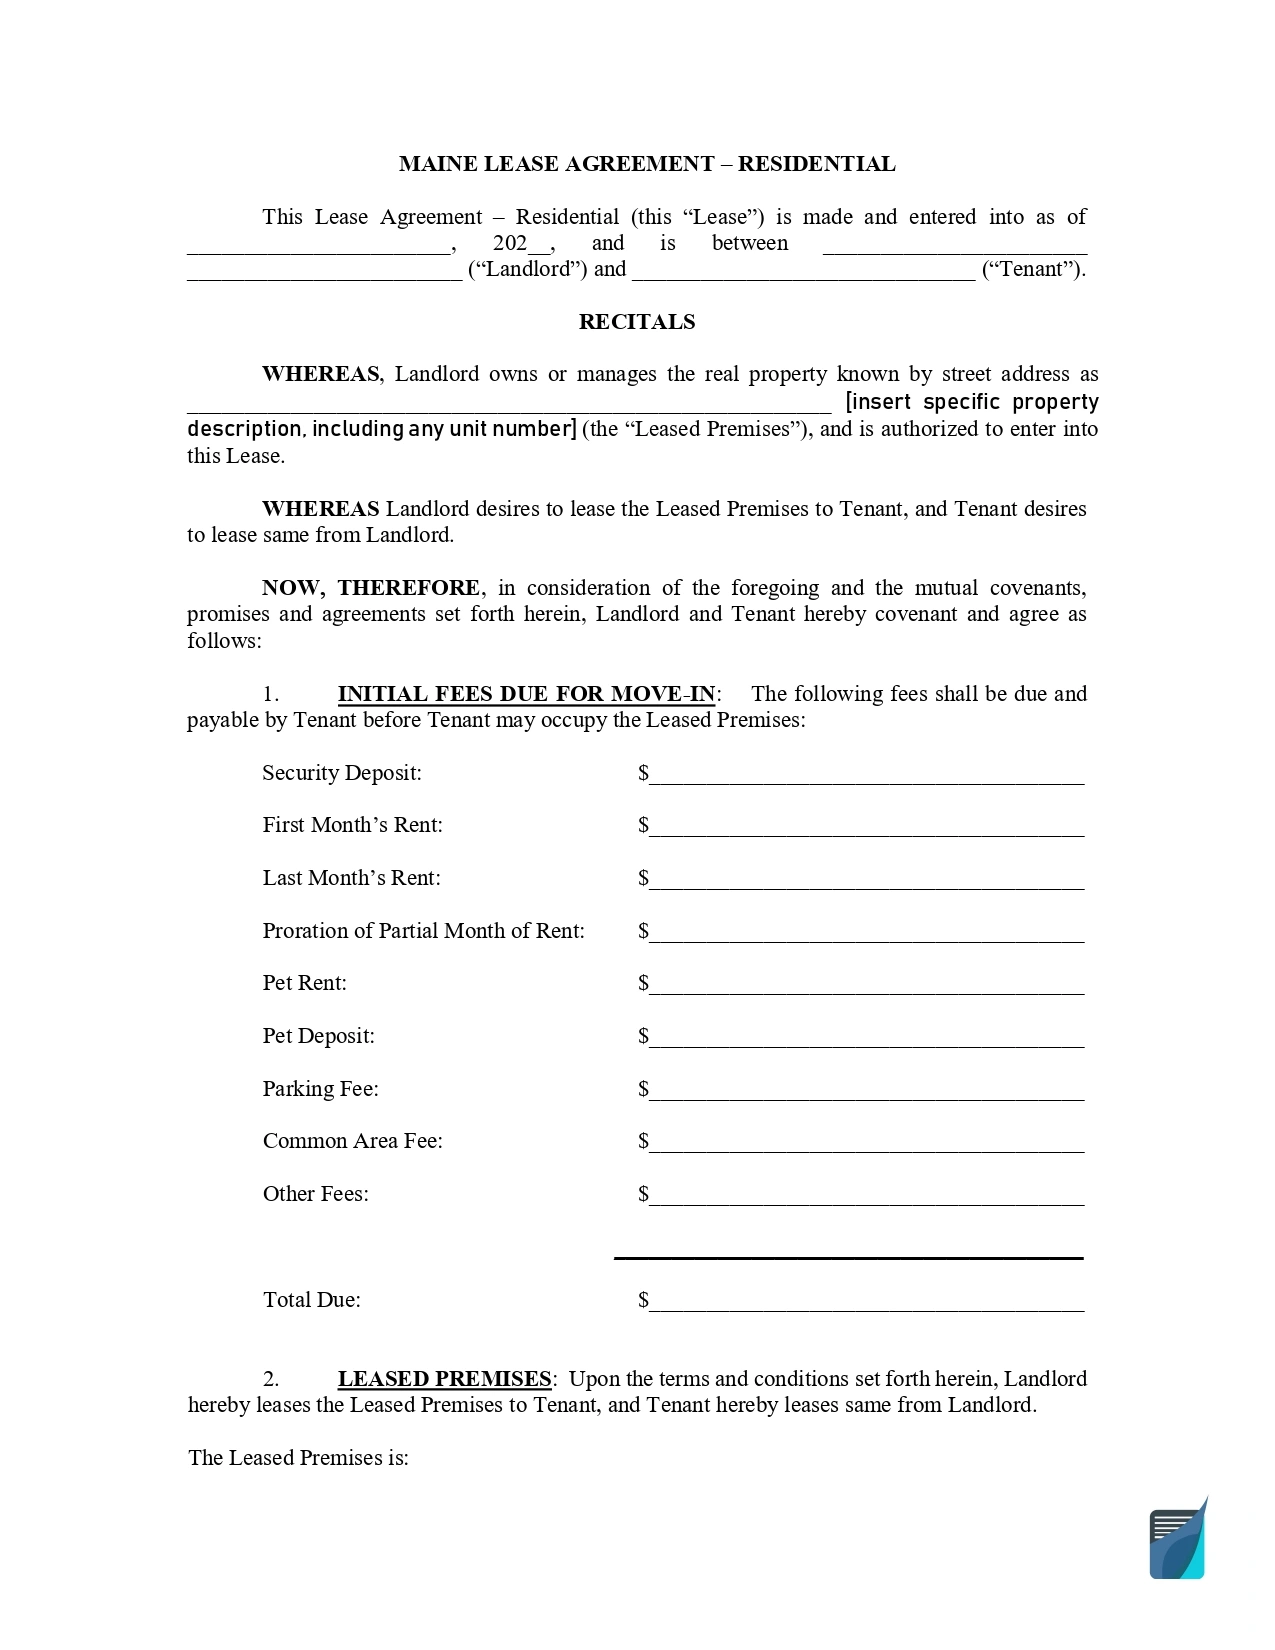 Maine-Lease-Agreement-Residential-Form